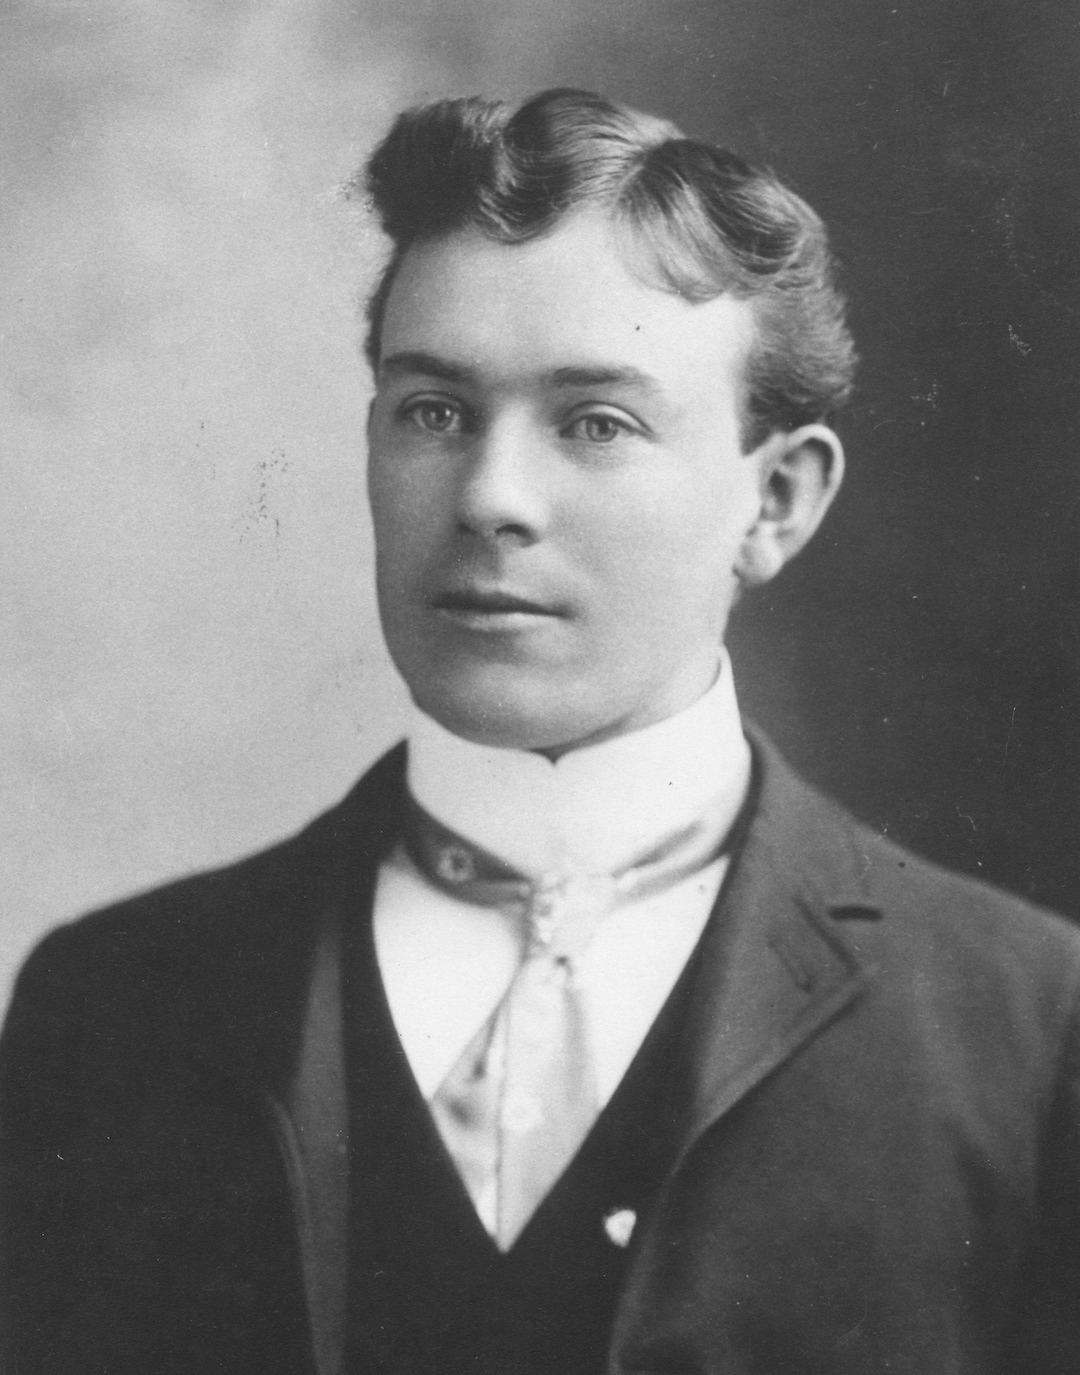 Black and white photographic portrait of John W. Stone as a young man.